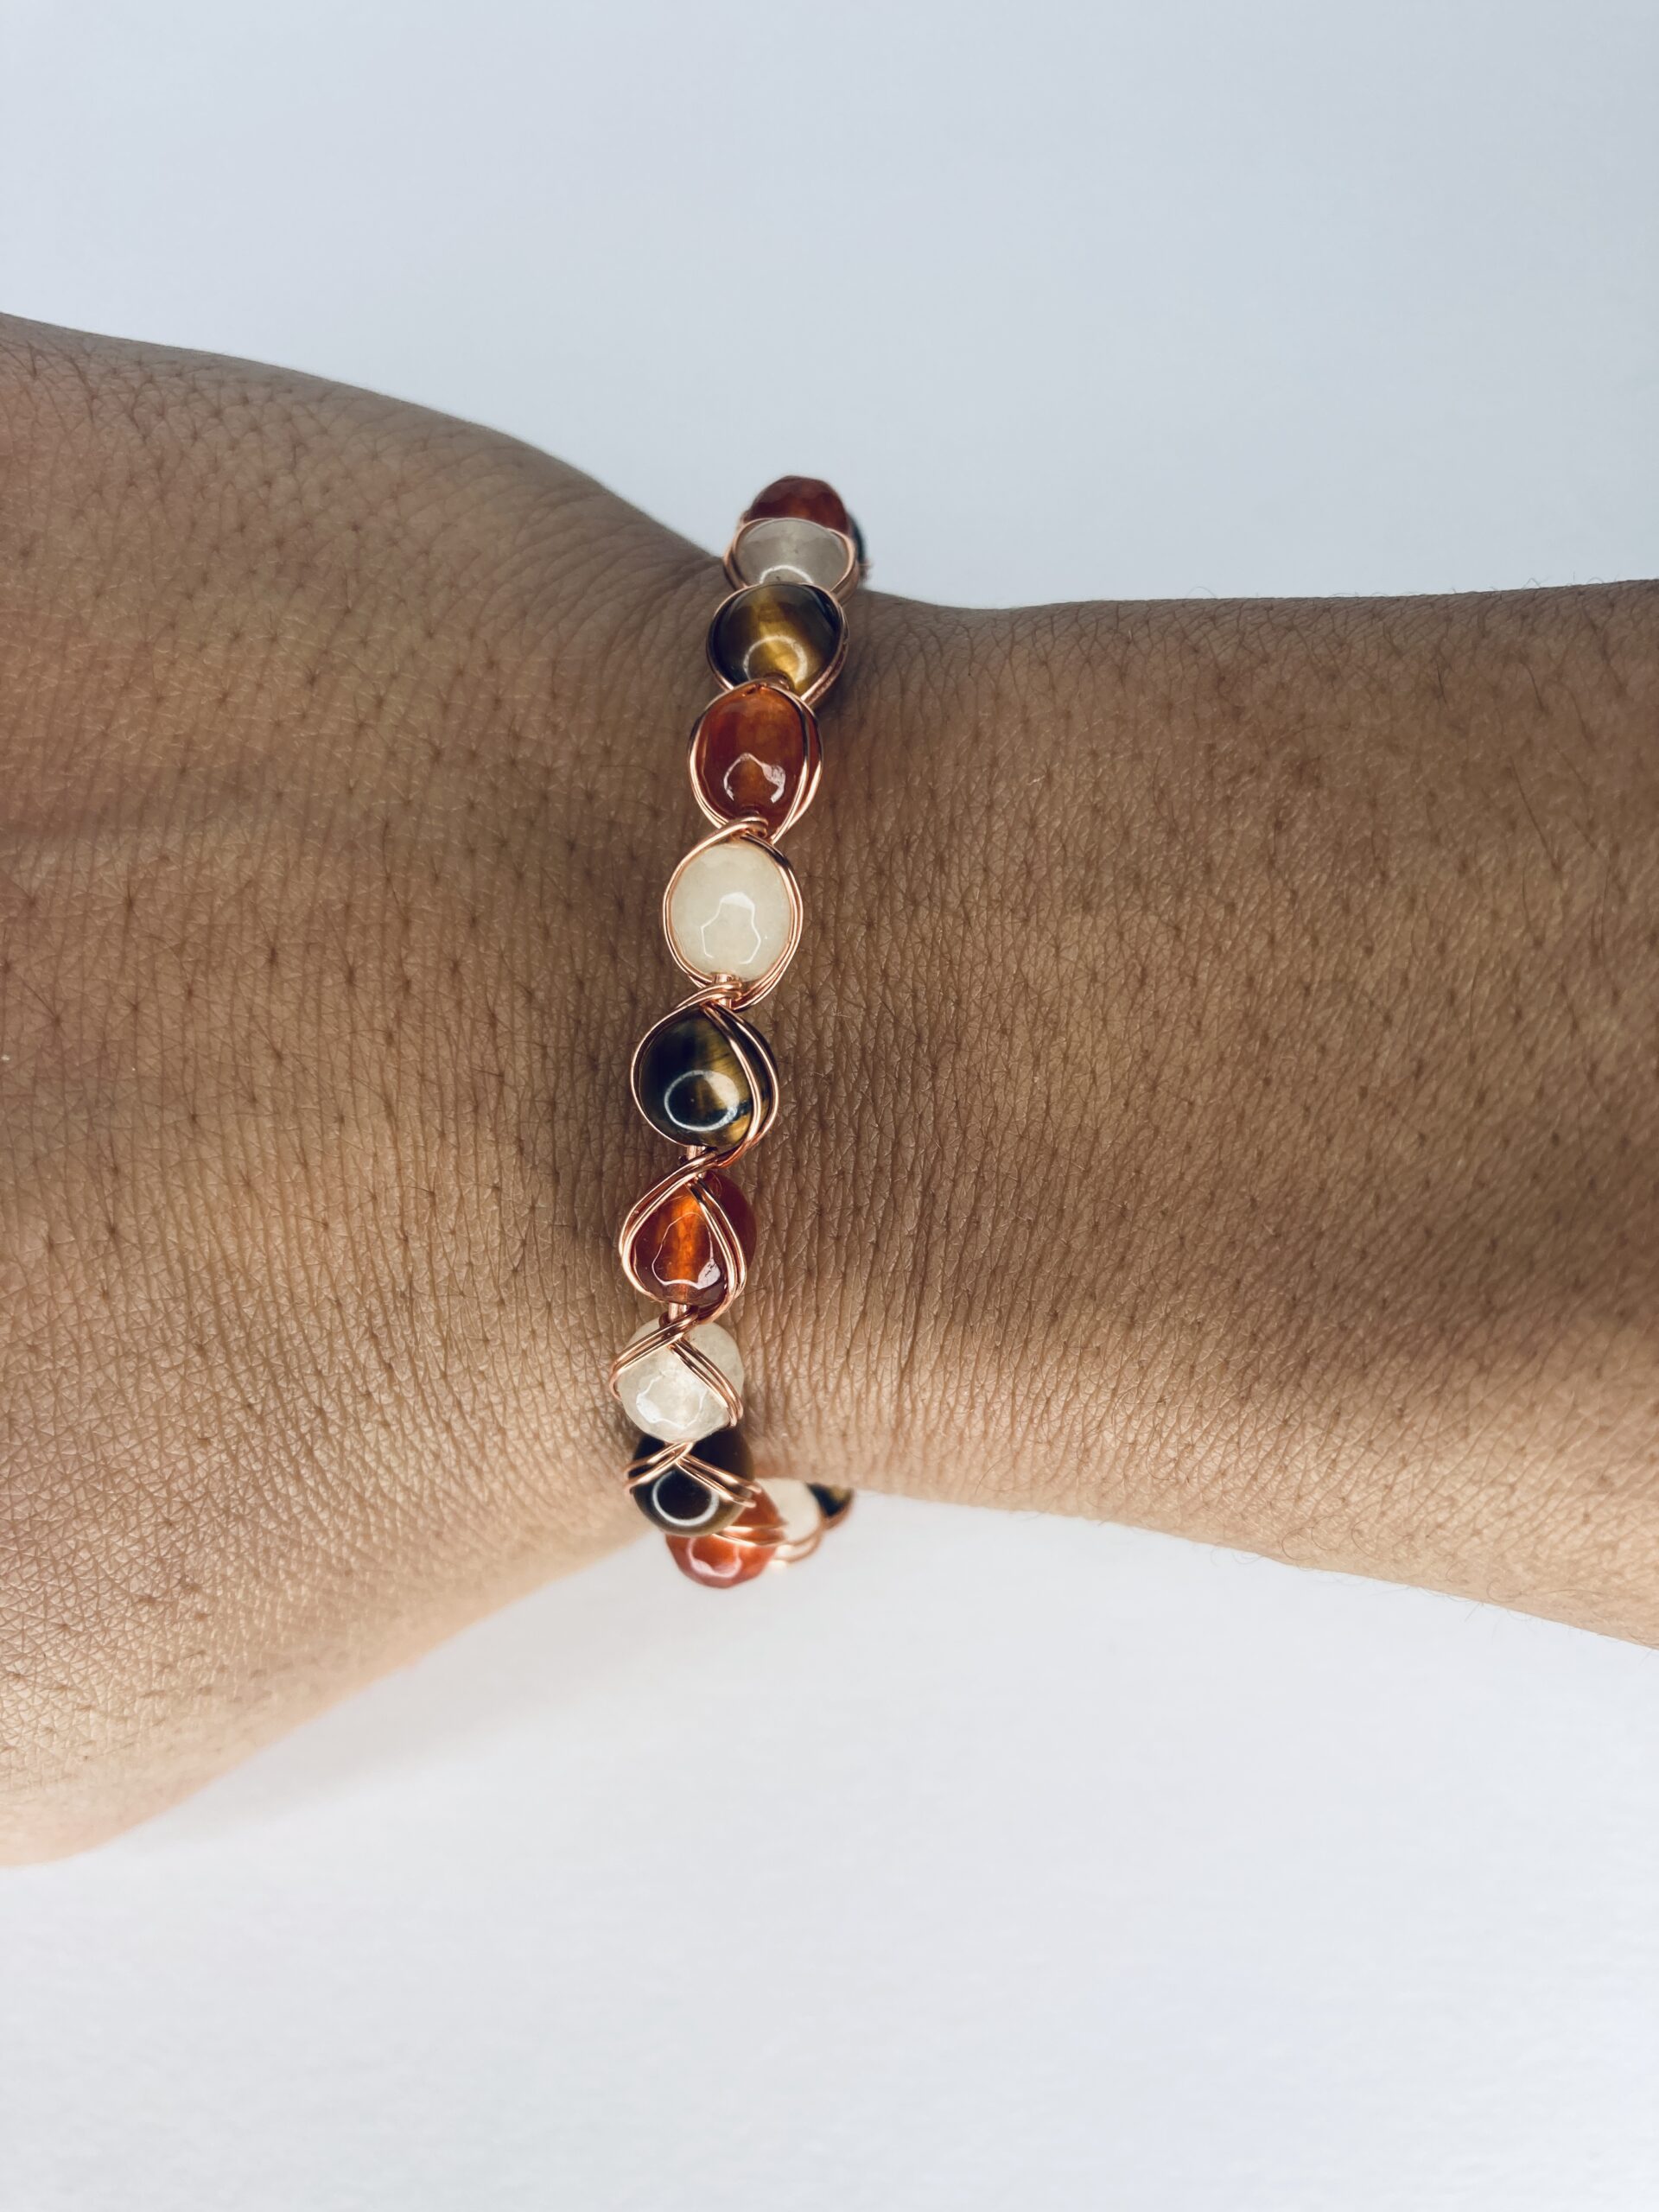 Tiger Eye and Carnelian Bracelet Xs (6 Inches)